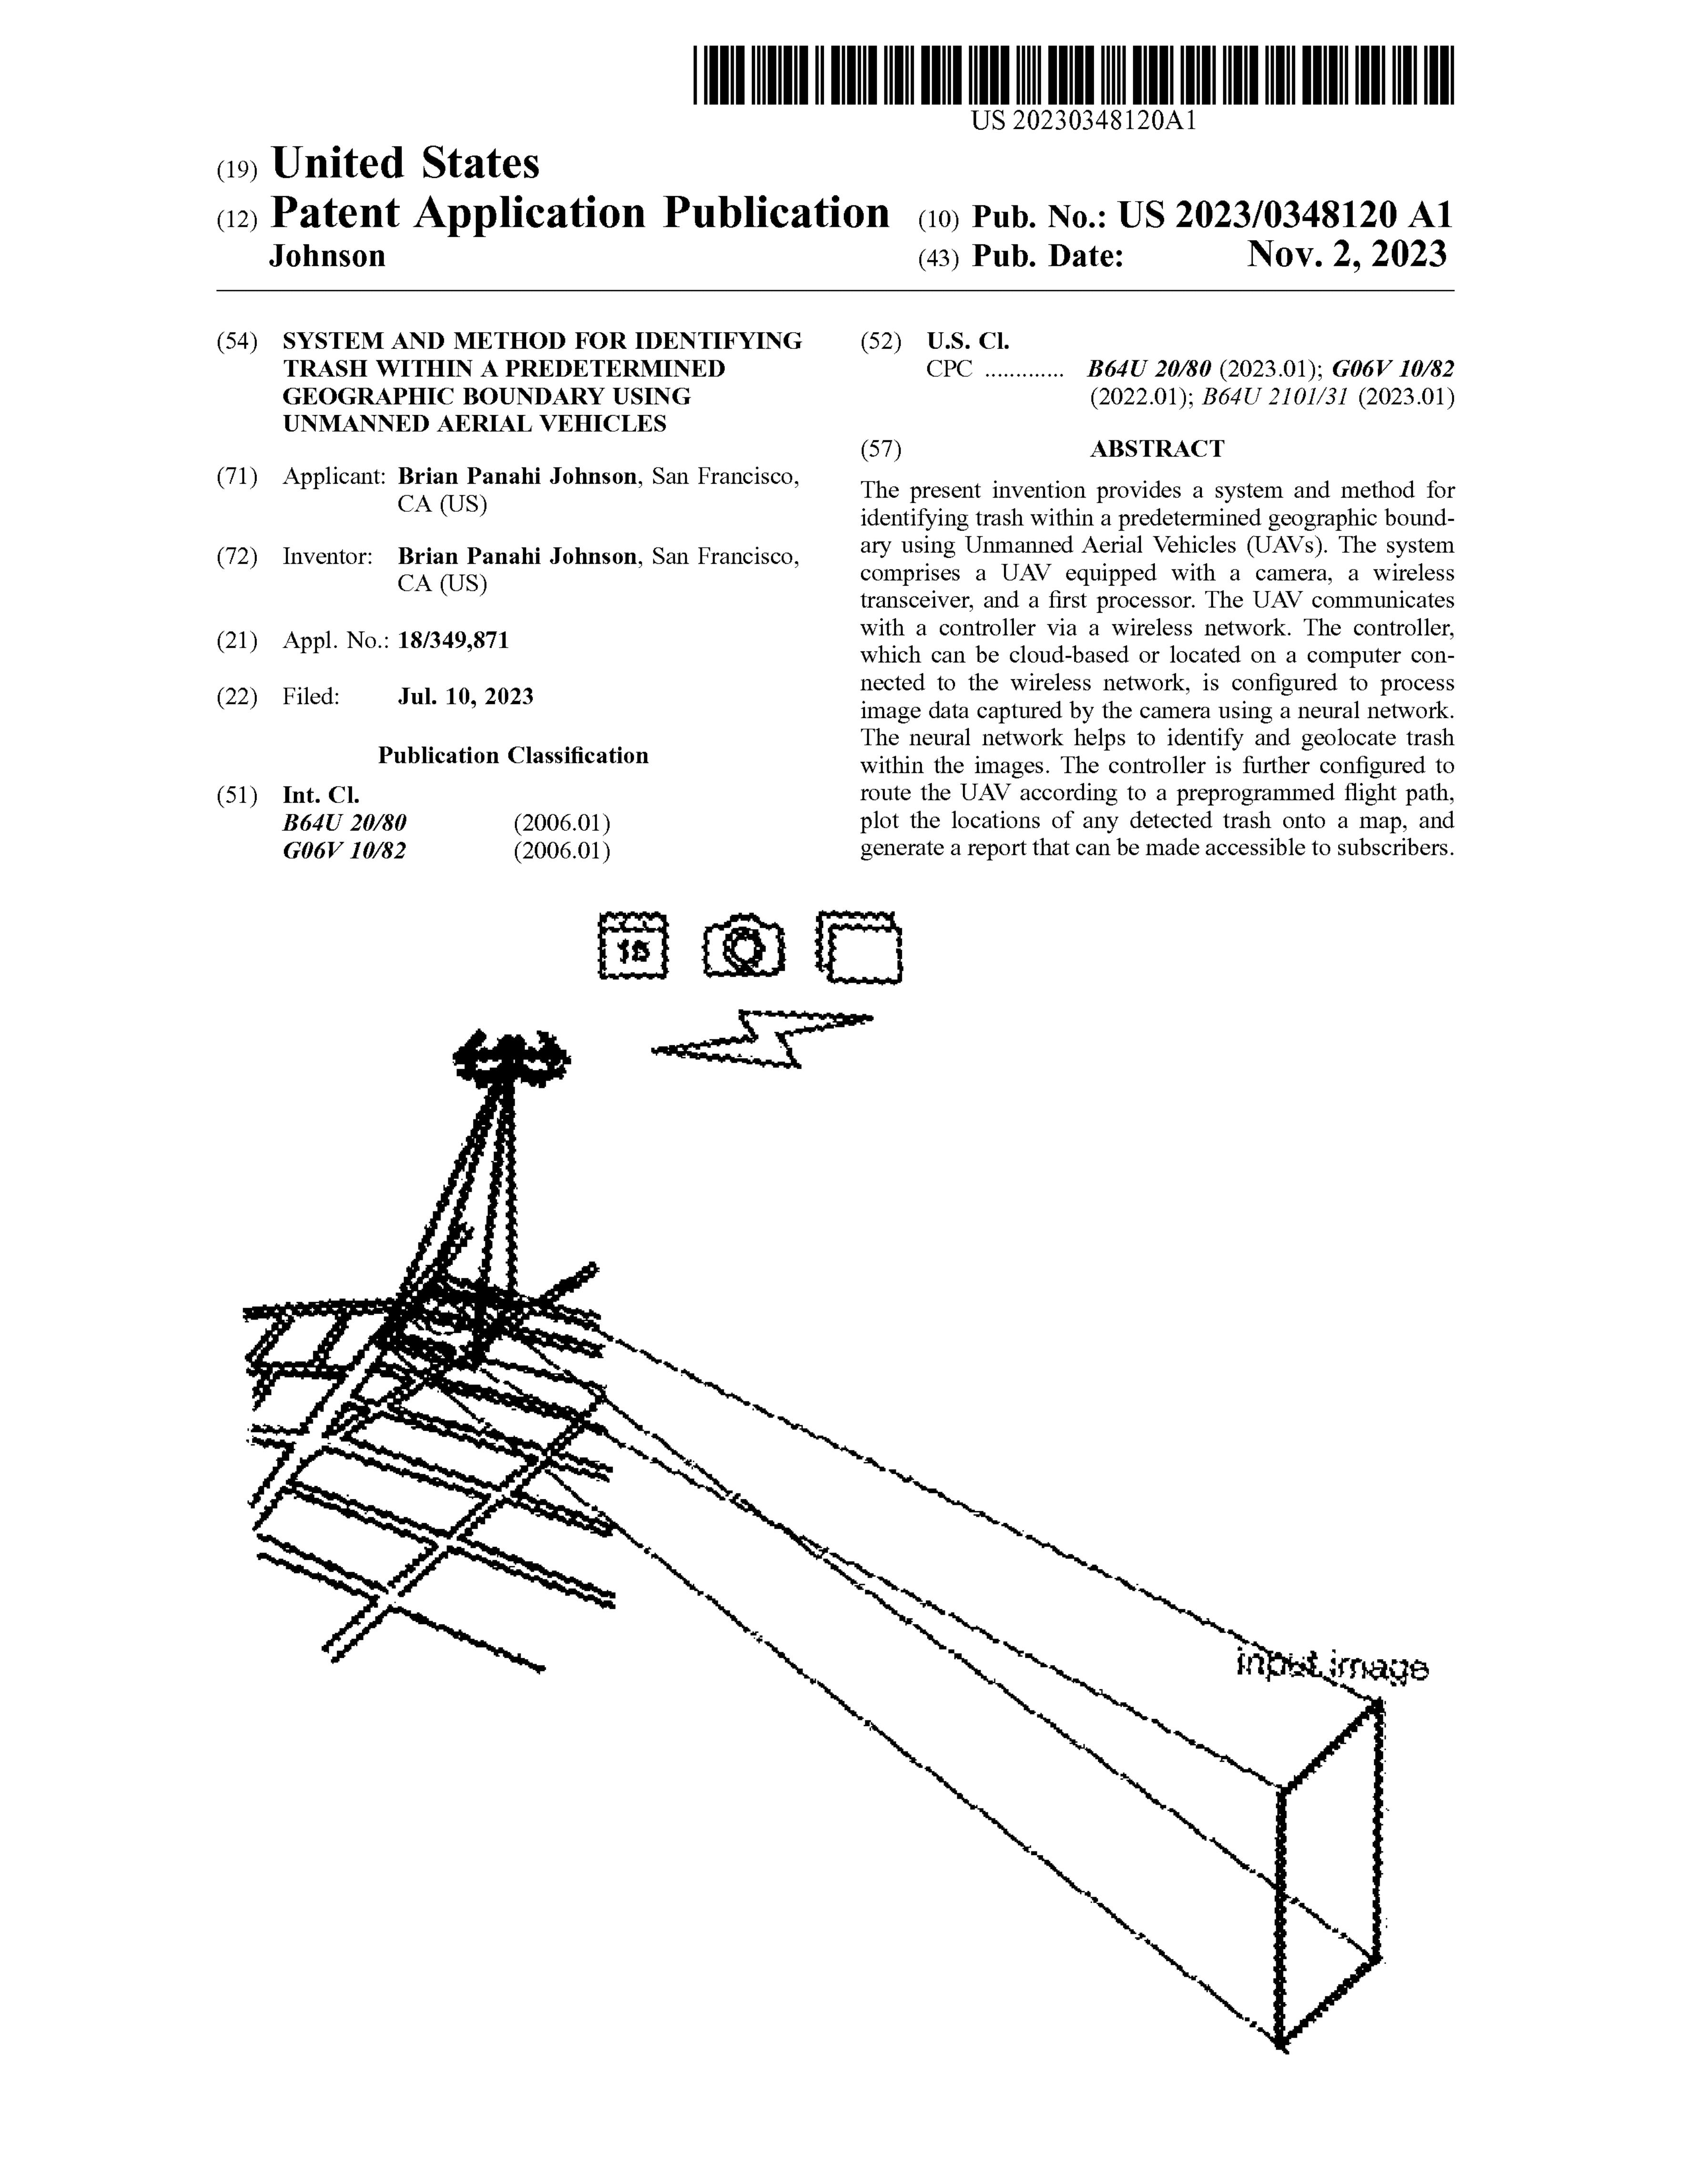 the first page of aerbits patent application for aerial trash detection and
reporting.